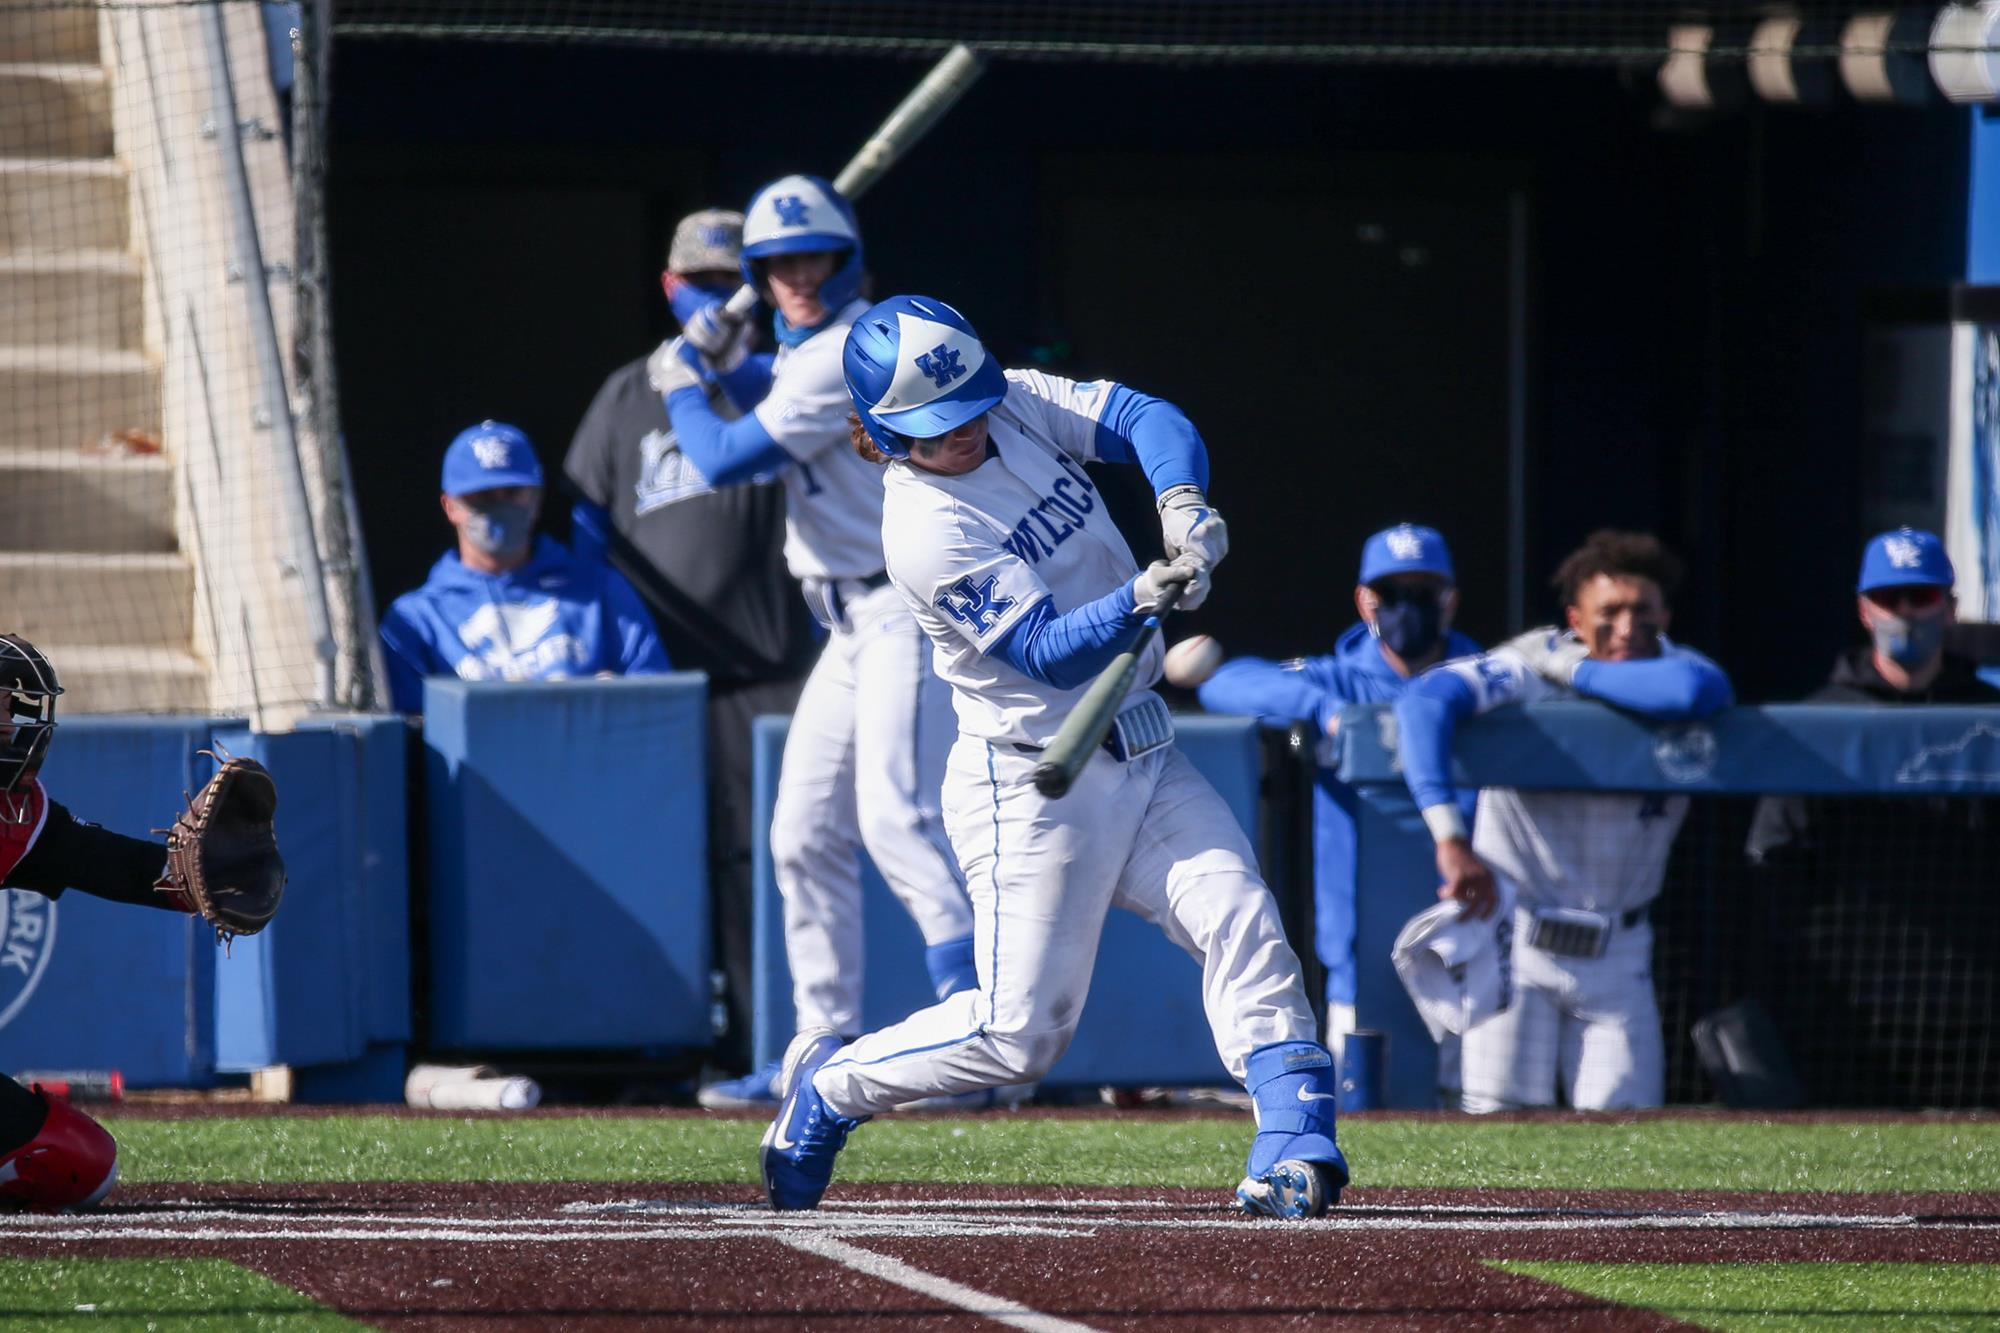 Blanked: Kentucky Evens Series With Shutout Victory